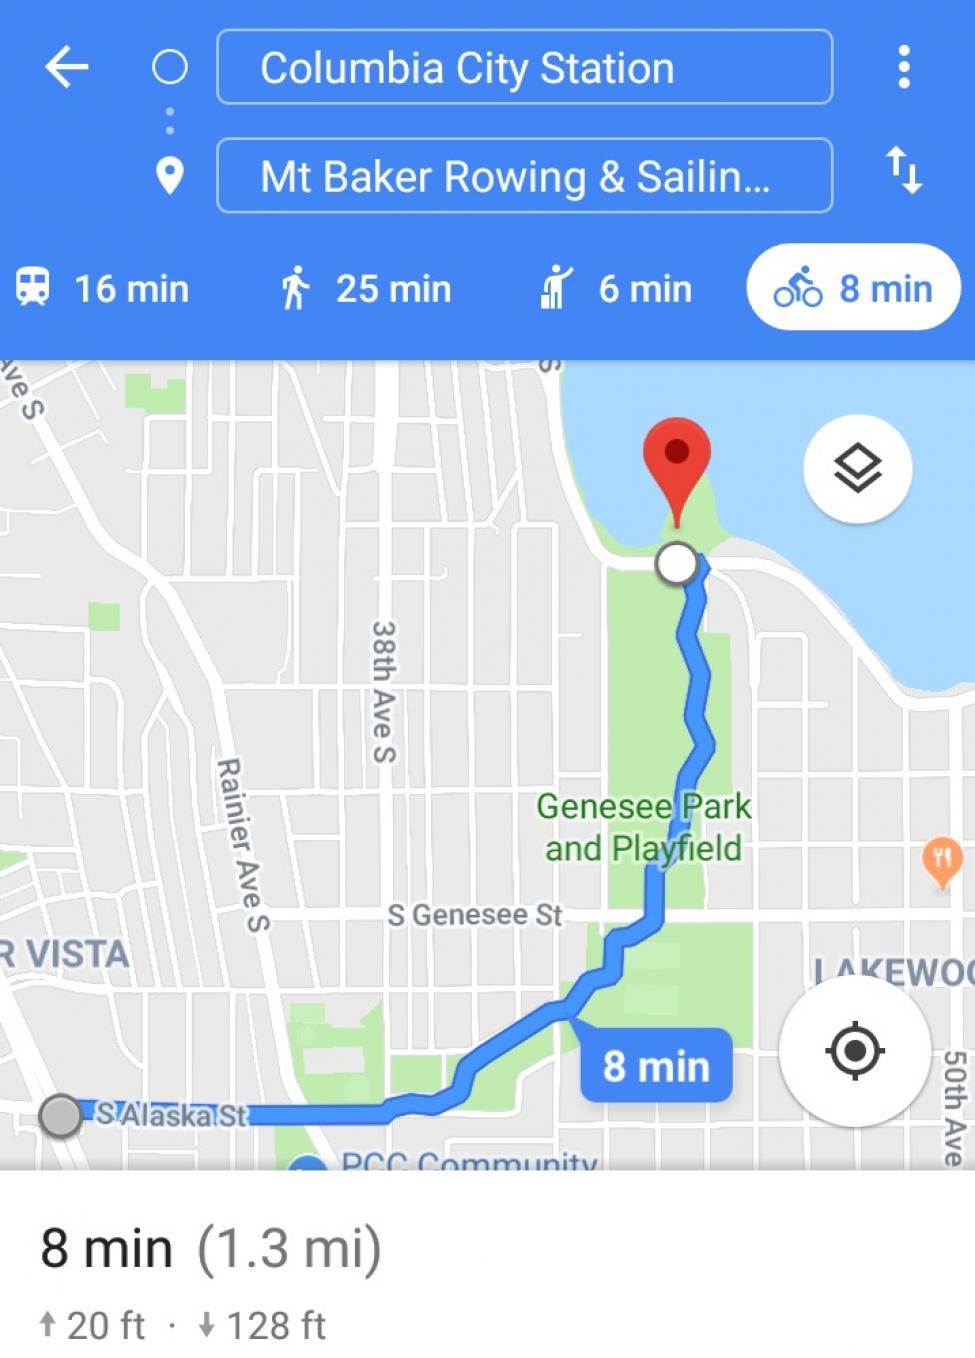 Directions to Lake Washington from Columbia City Station